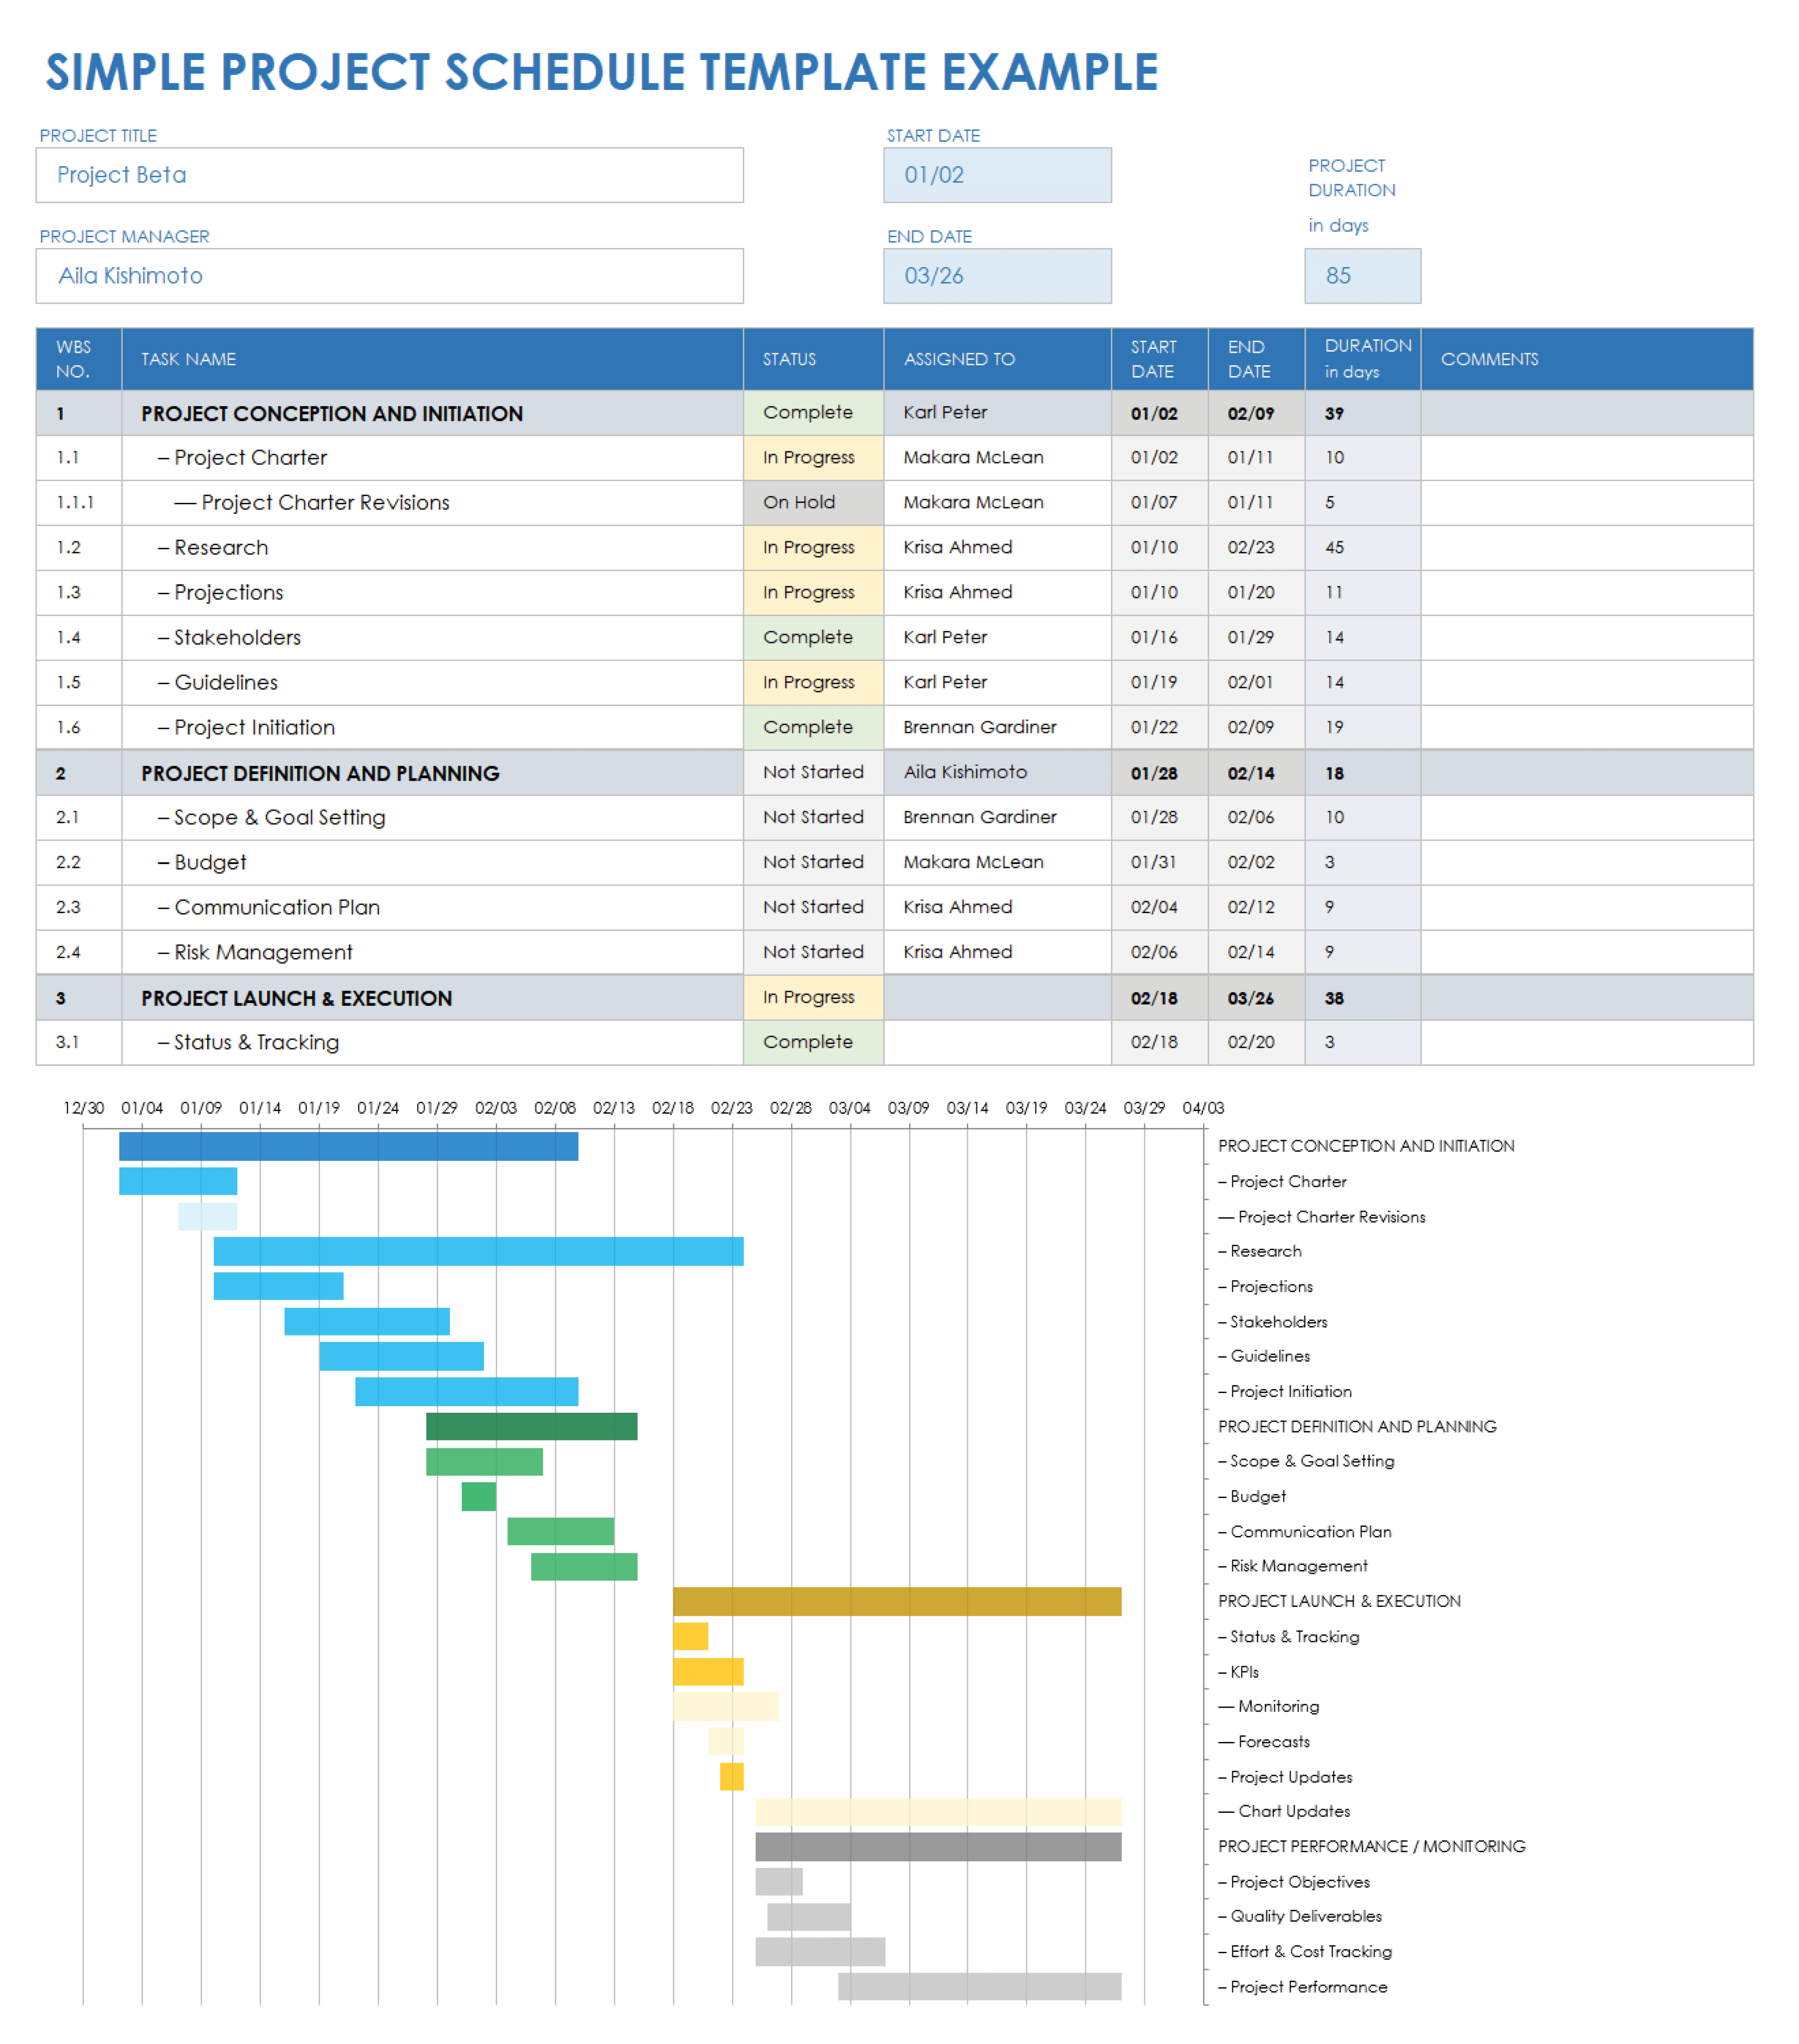 Example Simple Project Schedule Template